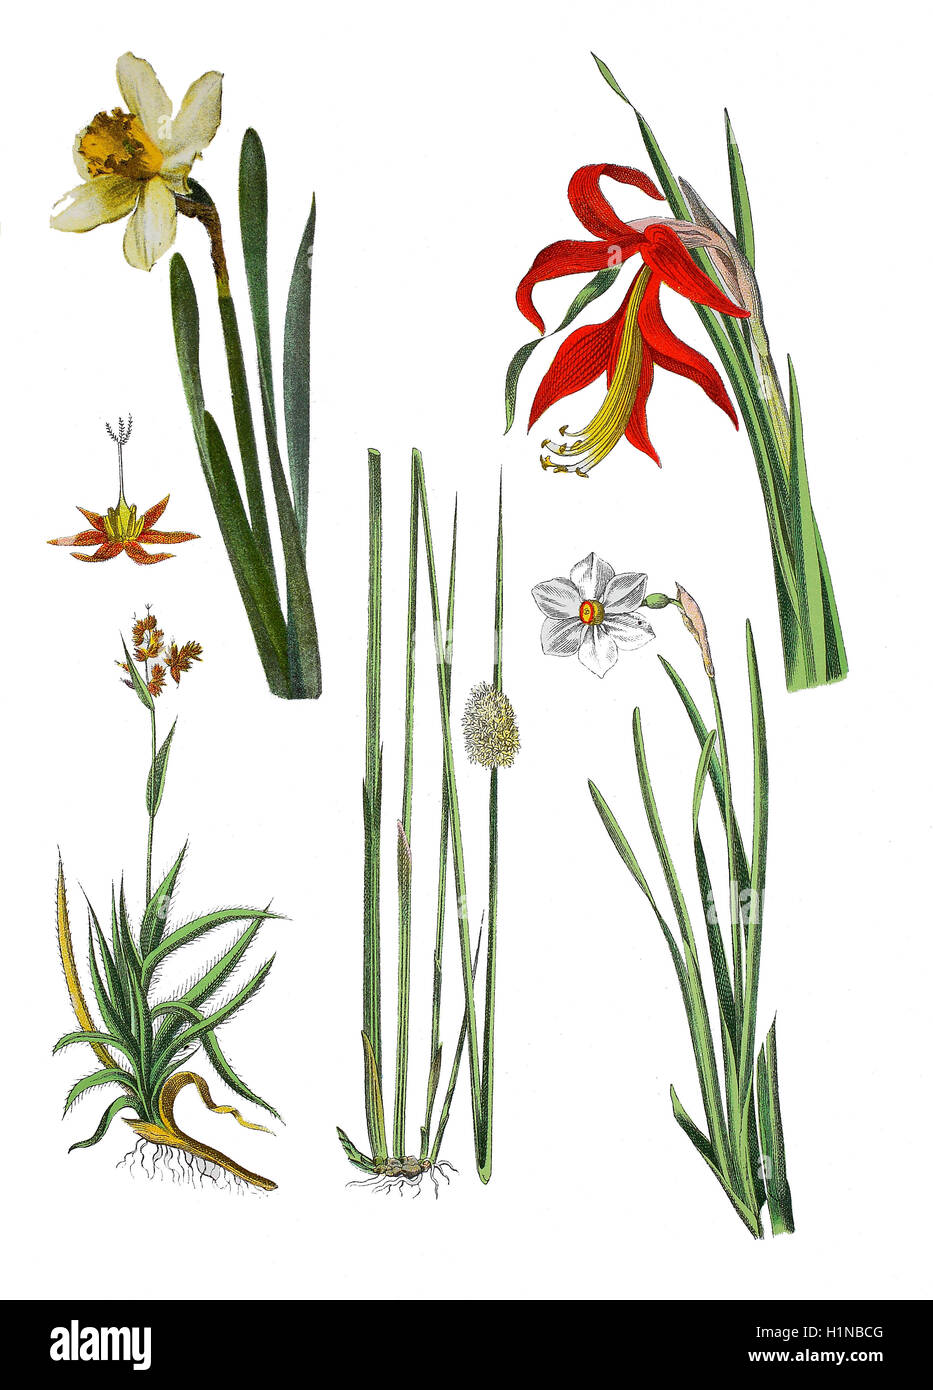 wild daffodil or Lent lily, Narcissus pseudonarcissus (left top), Sprekelia lily, Sprekelia formosissima (top right),  field wood-rush, Good Friday grass, Luzula campestris (bottem left), compact rush, Juncus conglomeratus (bottem center), poet's daffodil, poet's narcissus, Narcissus poeticus (bottem right) Stock Photo